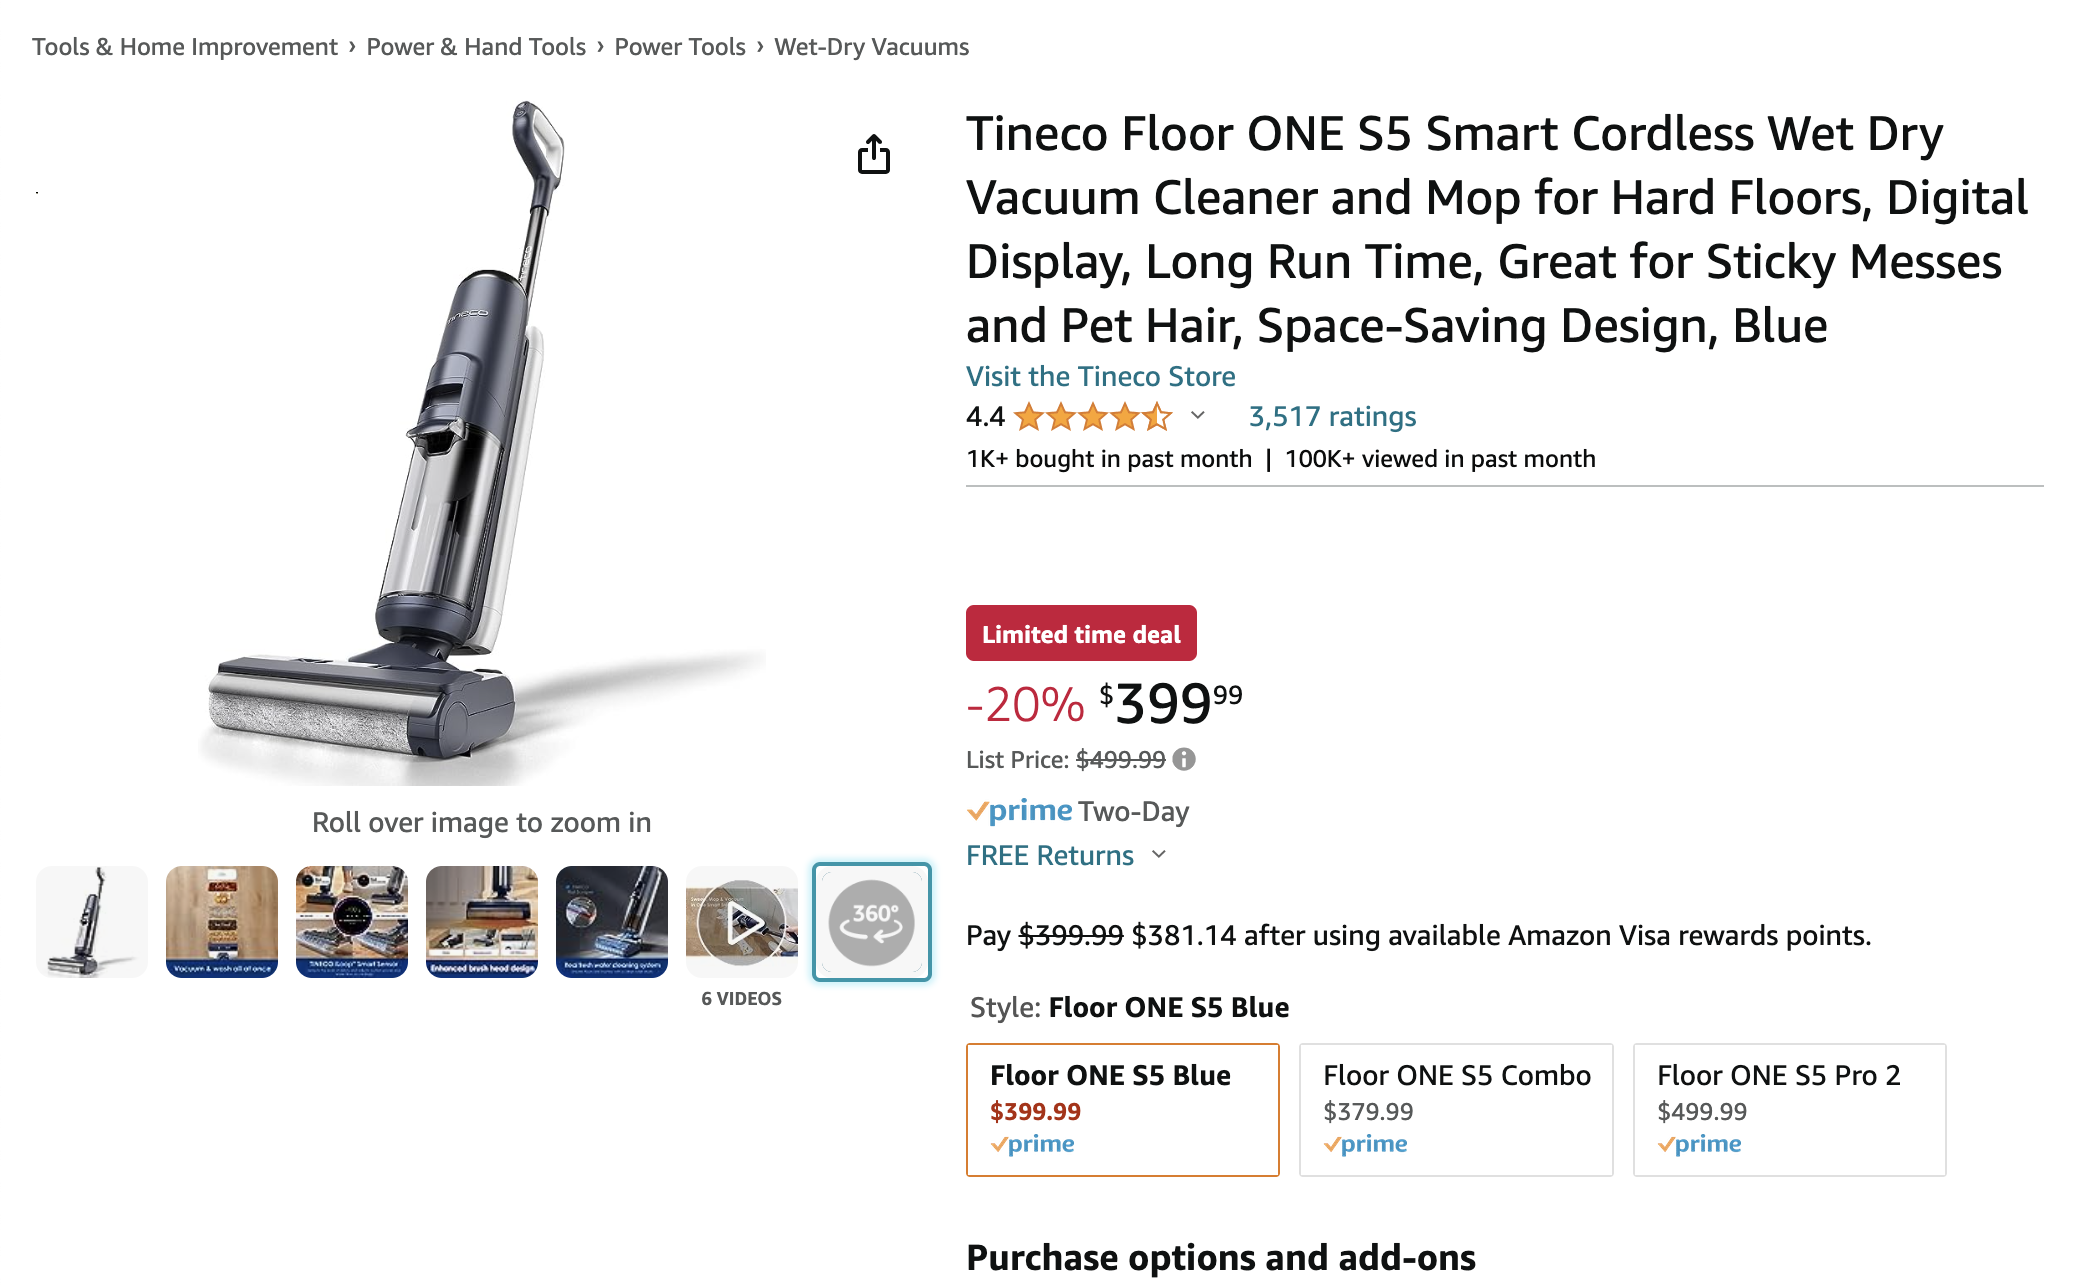 Tineco Floor ONE S5 Smart Cordless Wet Dry Vacuum Cleaner and Mop 